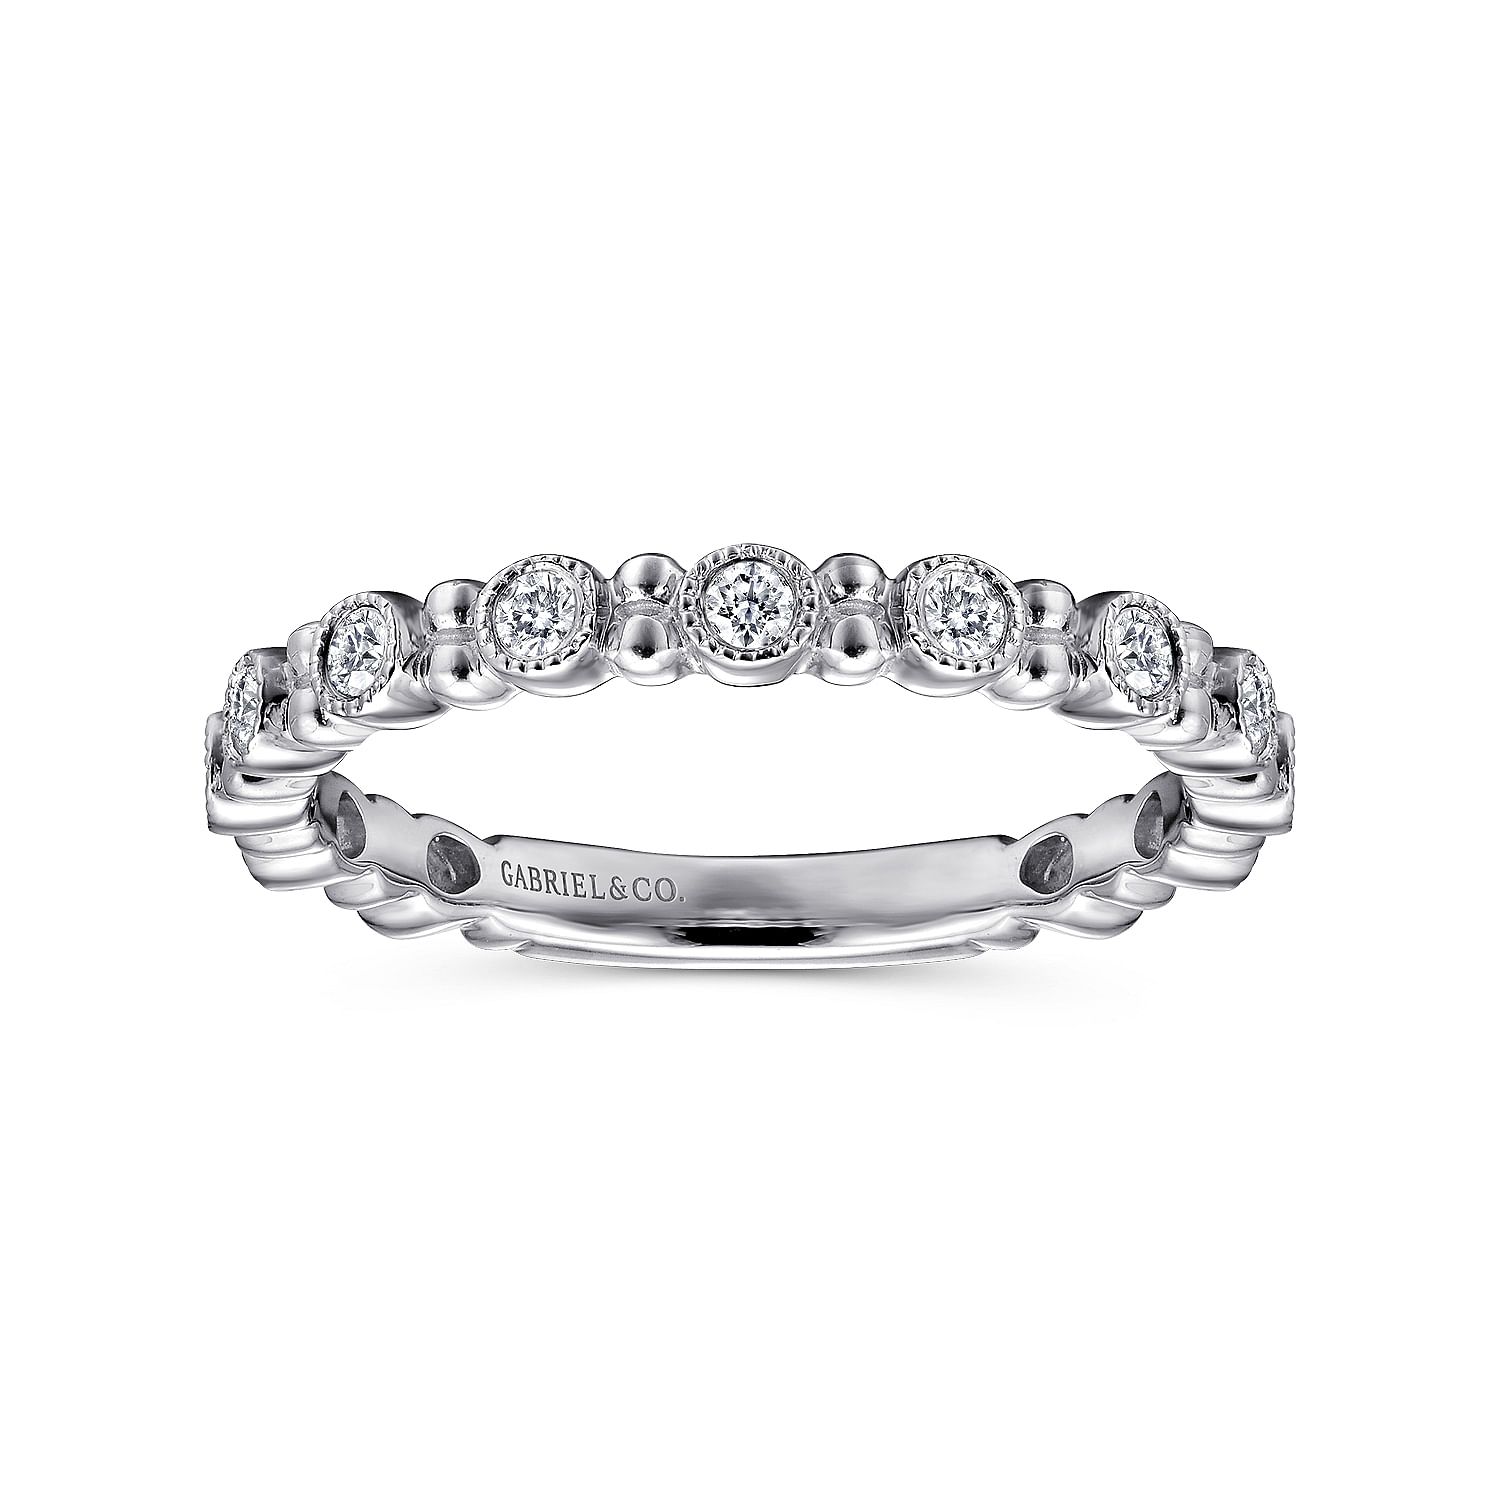 14K White Gold Stackable Diamond Ring with Bead Spacers